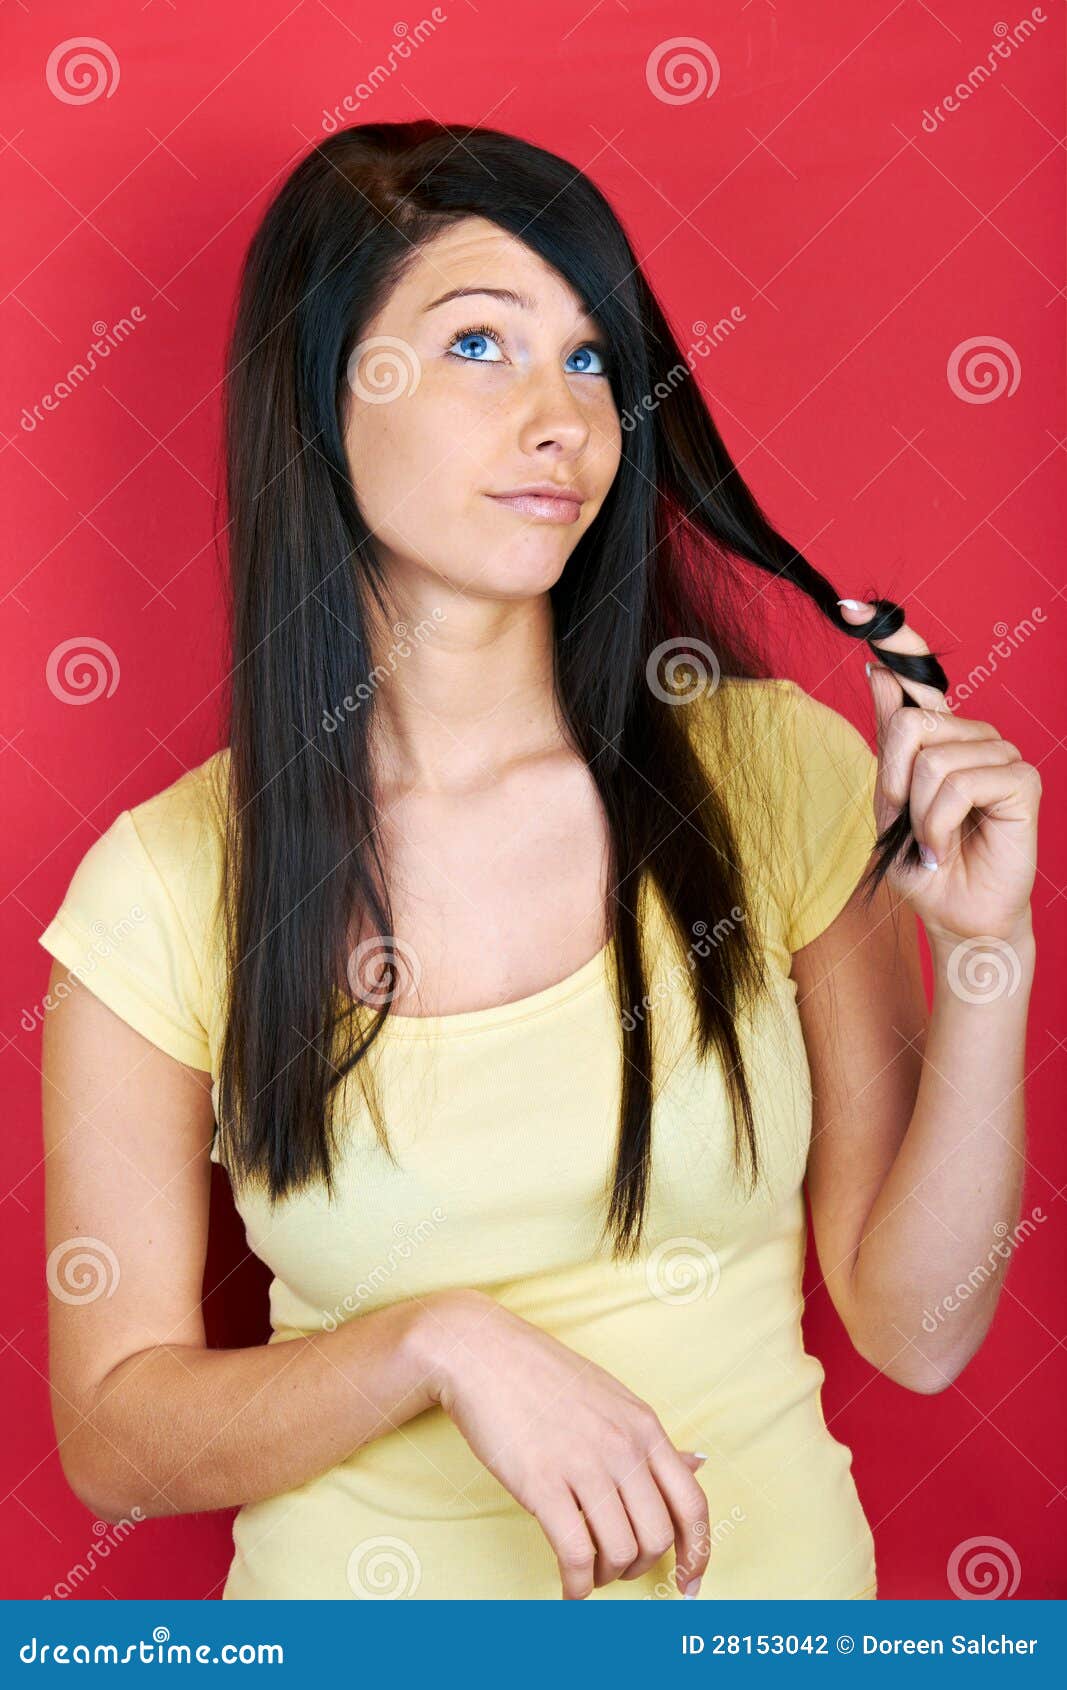 Twirling hair stock photo. Image of lifestyle, satisfaction - 28153042